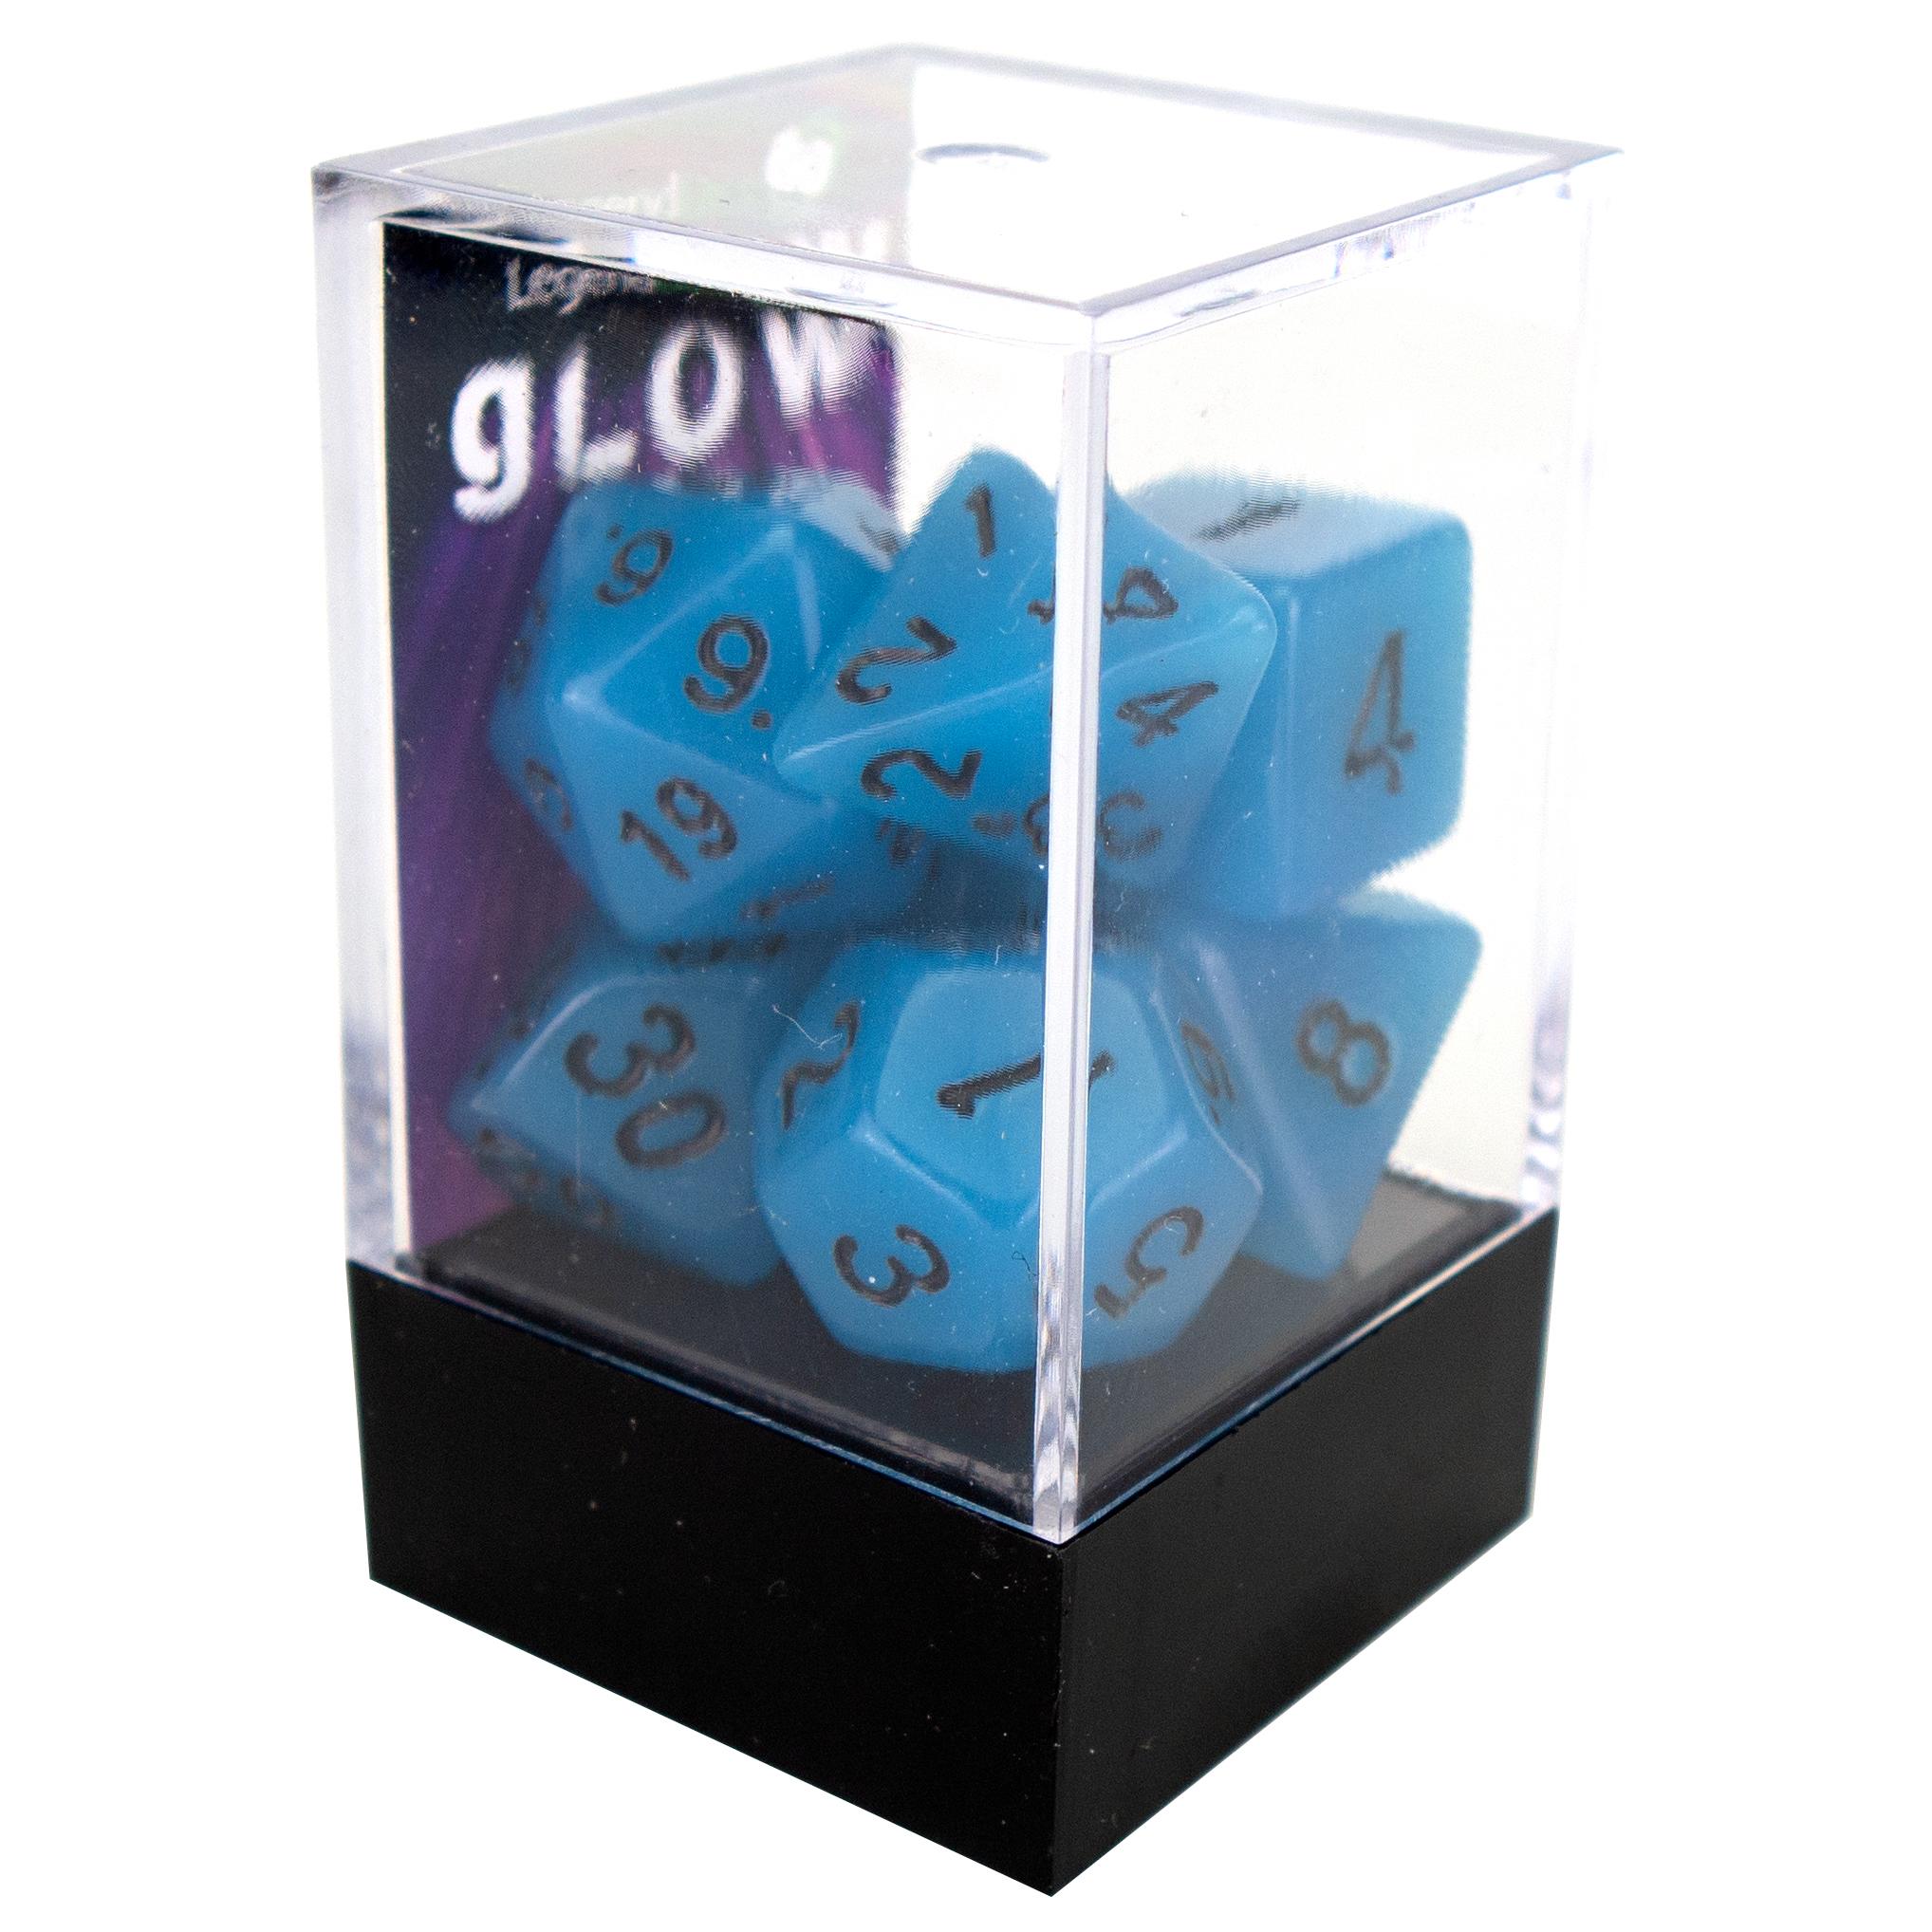 YES 14pcs Digital Glowing Dice Set Fun Puzzle Polyset Dice for